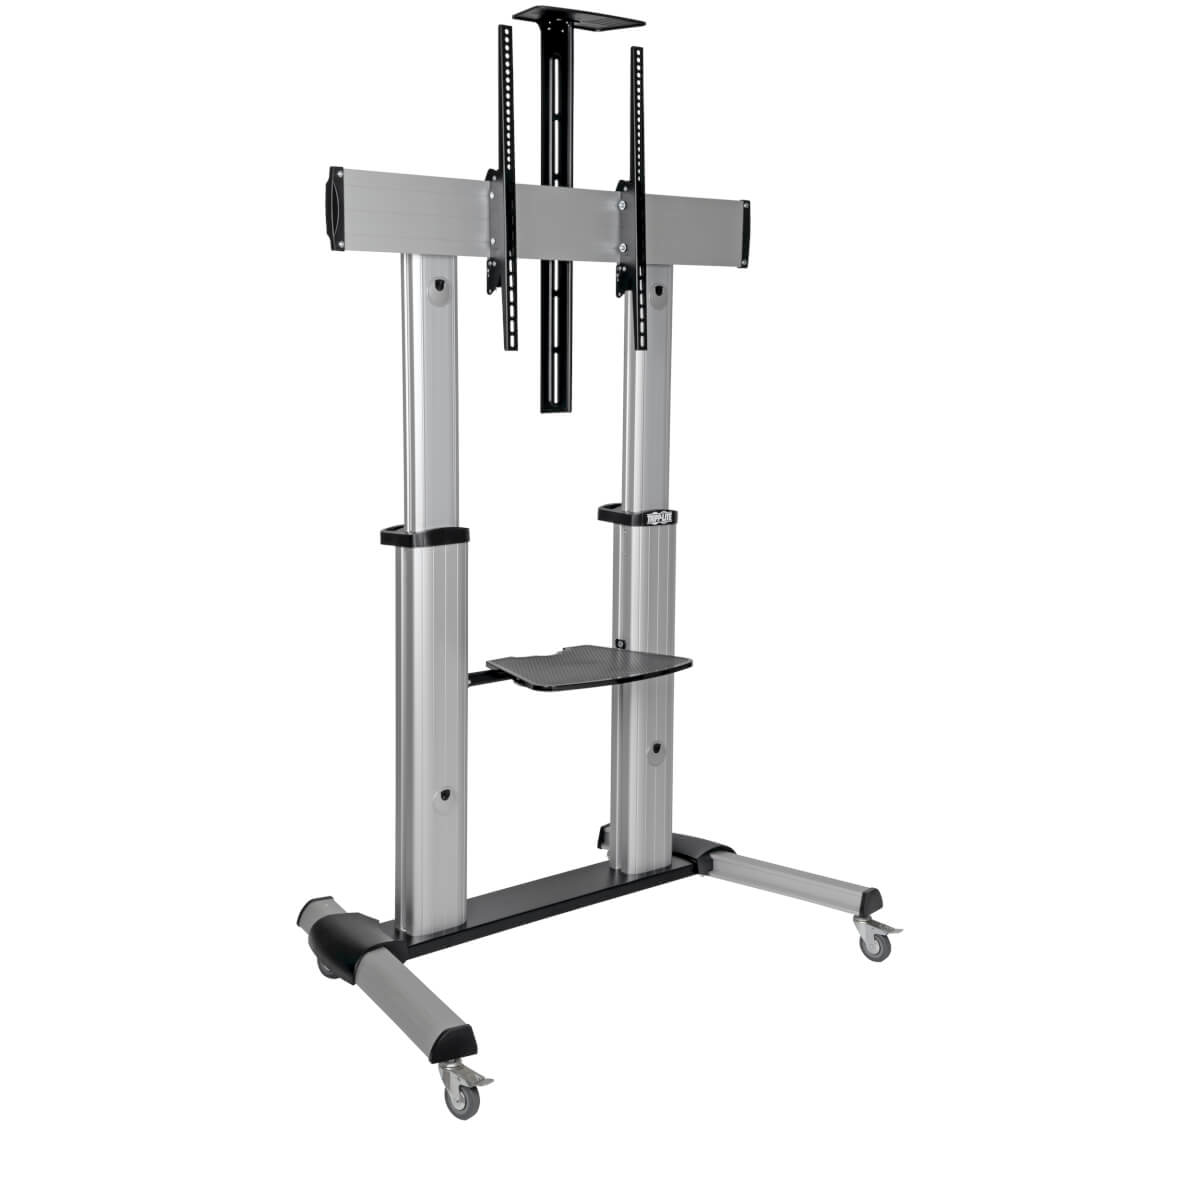 EATON TRIPPLITE Heavy-Duty Rolling TV Stand Height Adjustable 152,4cm 60inch 254cm 100inch Screens